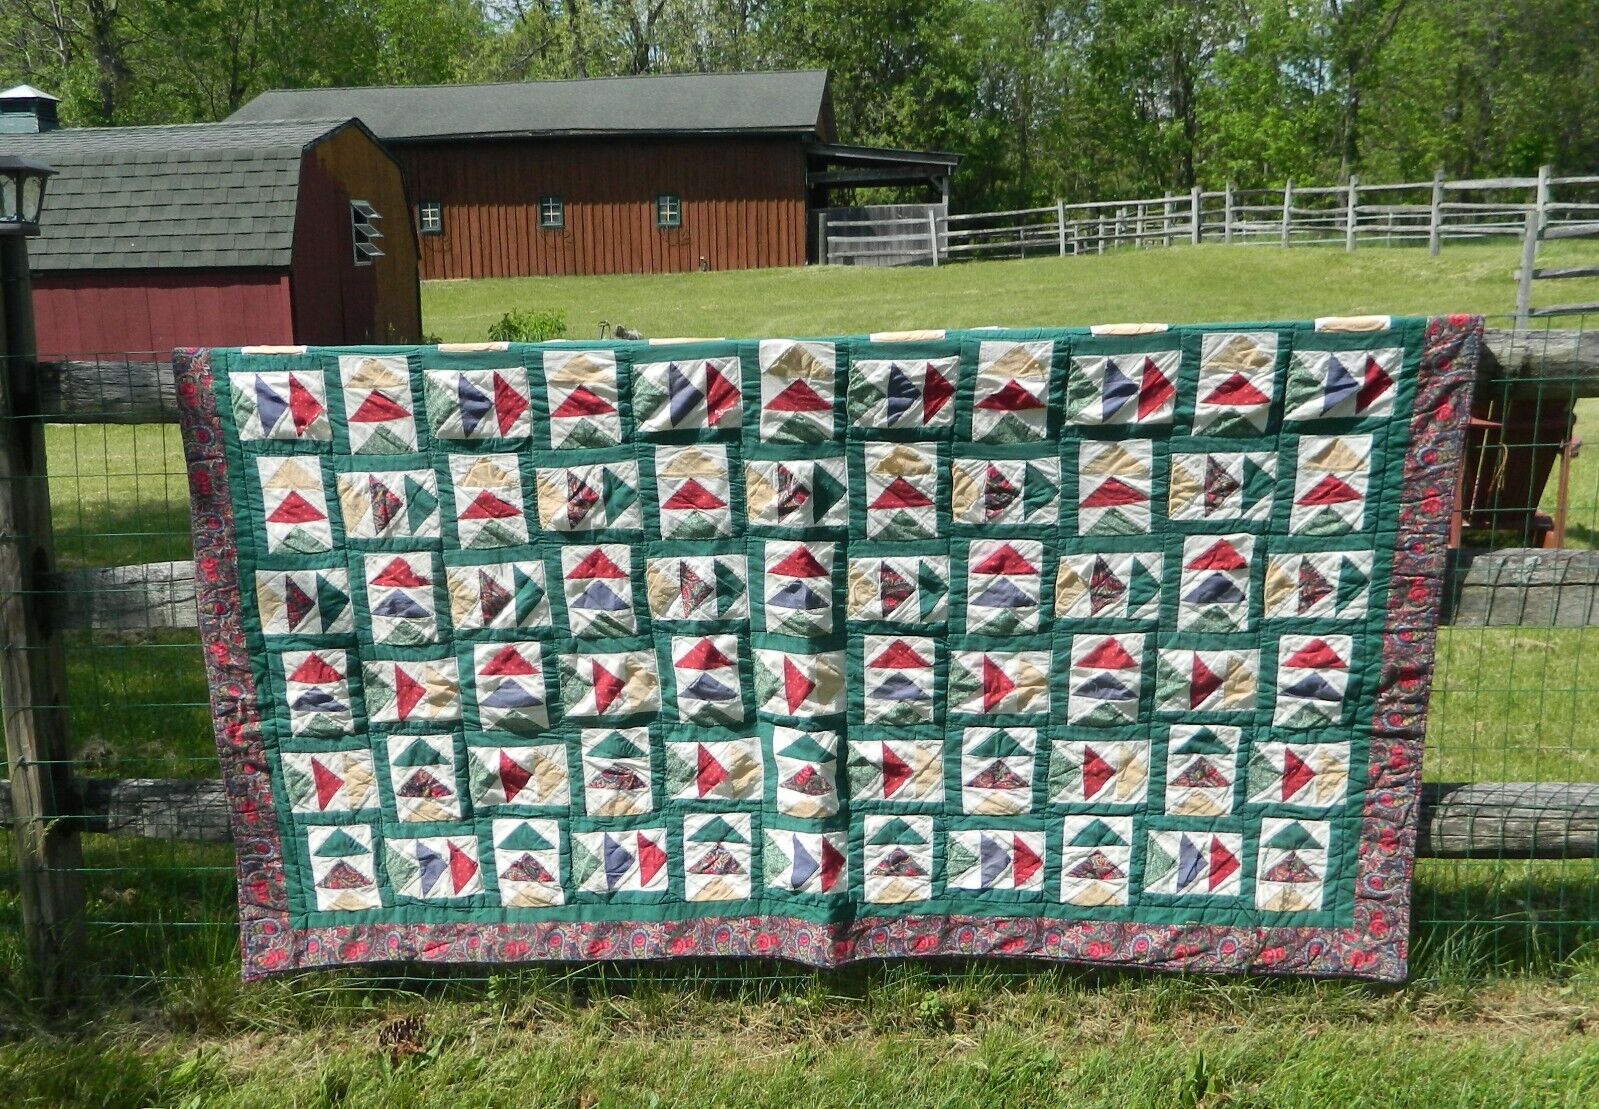 Vintage Cutter Quilt - As is - Worn with Flaws